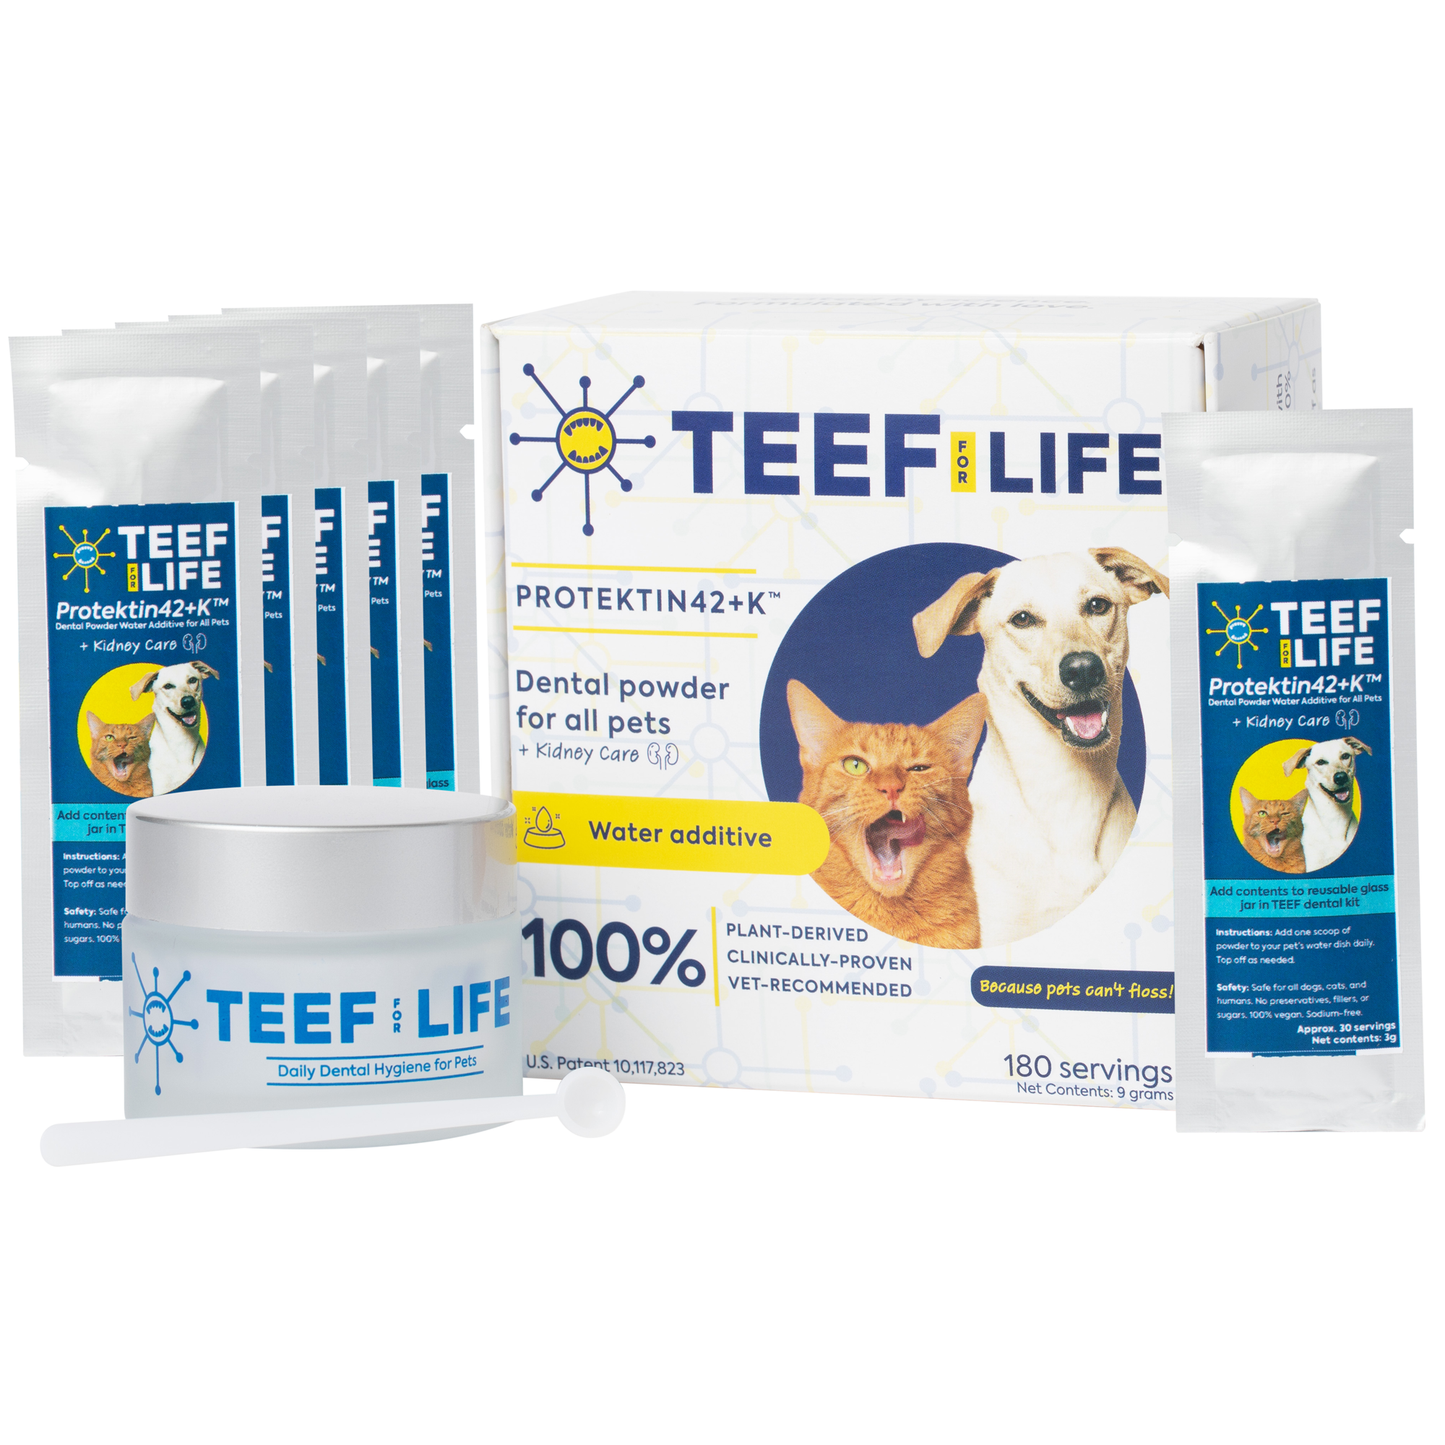 Teef for Life - Protektin42+K - Dental Kit: Powder Water Additive for All Pets + Kidney Care 30 Servings (1 Powder Packet)